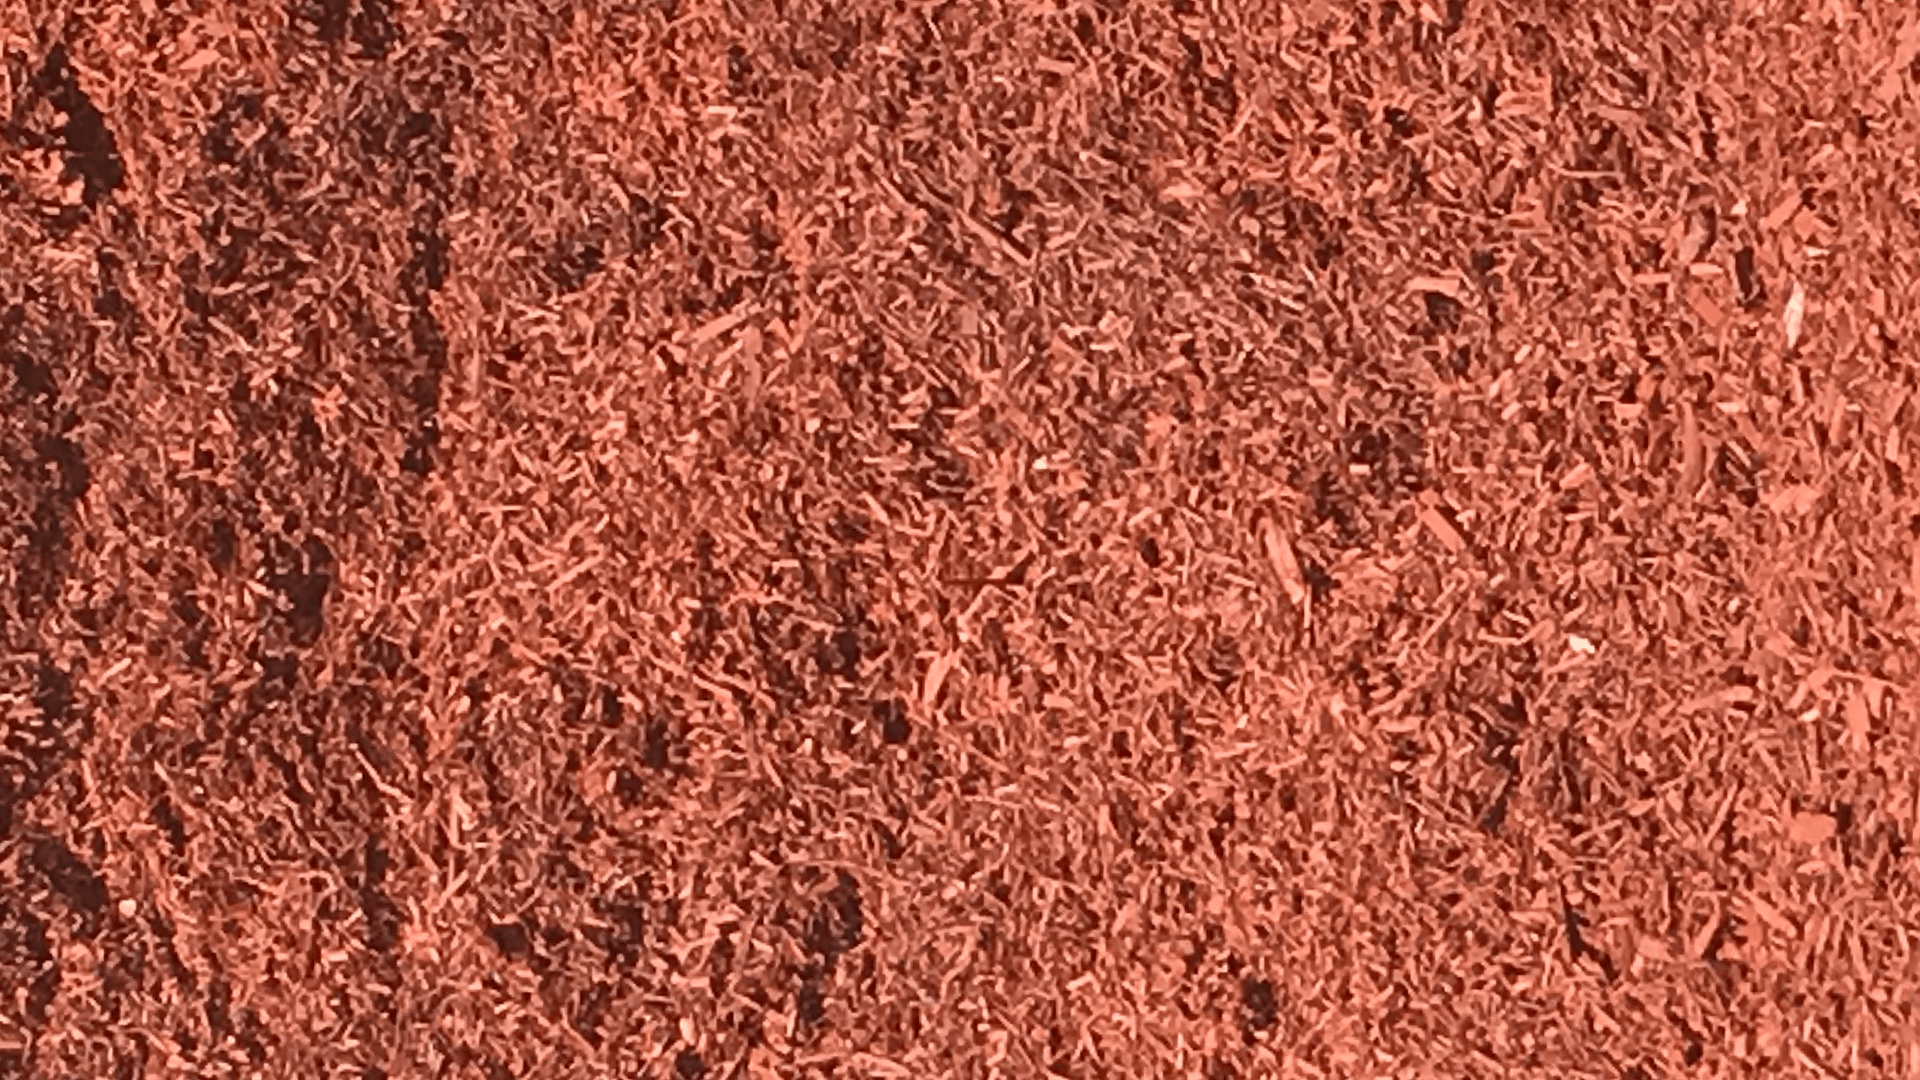 Red Dyed Chips. Soil Amendments